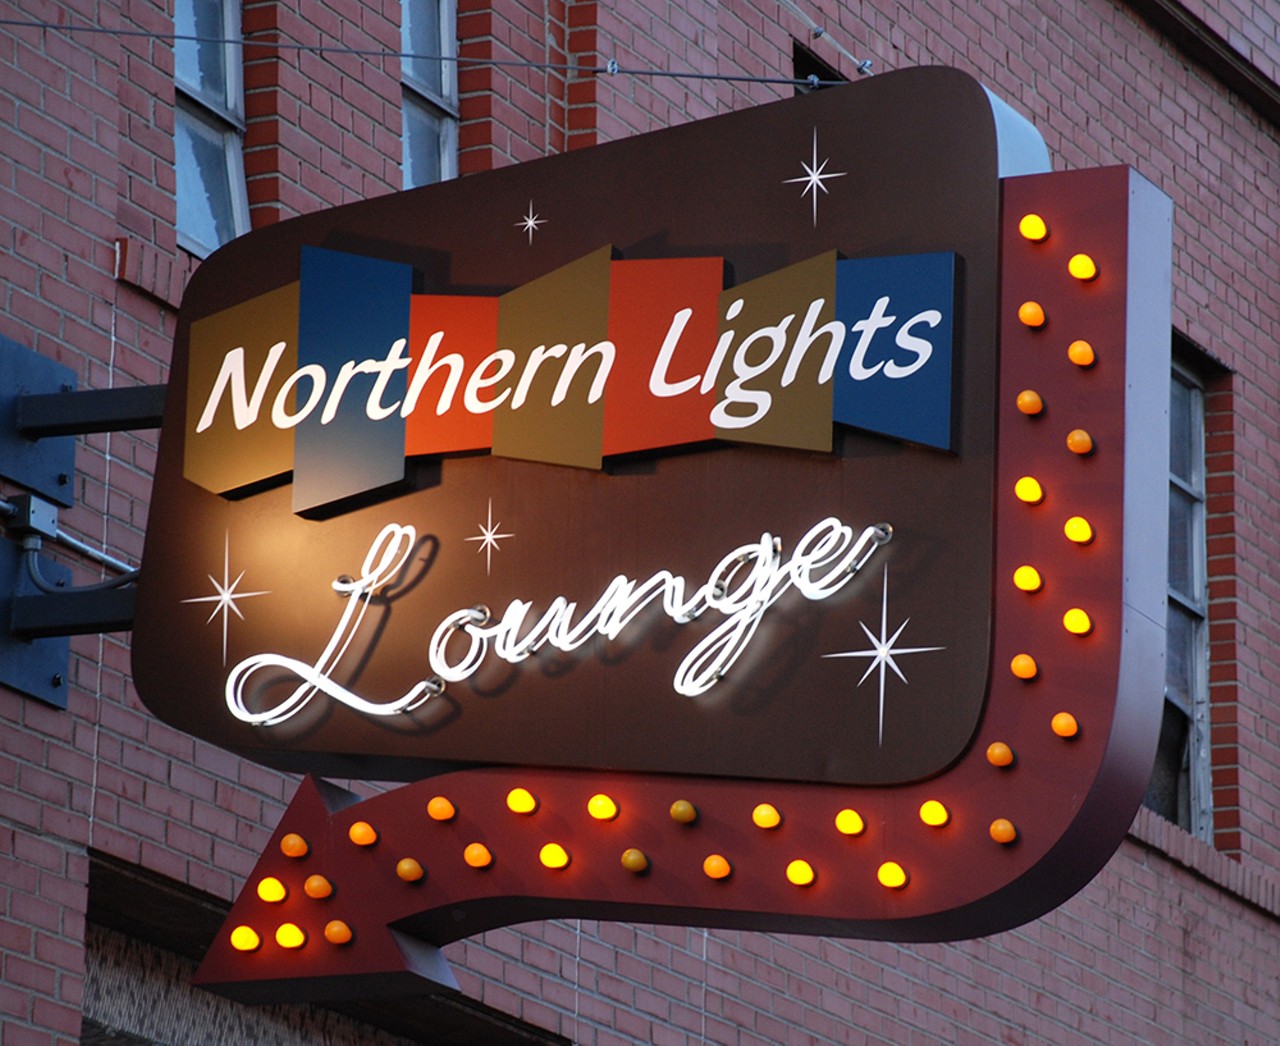 
BBs After
When: April 6 at 9 p.m.
Where: Northern Lights Lounge (Detroit)
What: An afterparty following the Bad Bunny concert
Who: Local DJs
Why: There will be lots of dancing to Latin music for those who are ready to party after the concert.